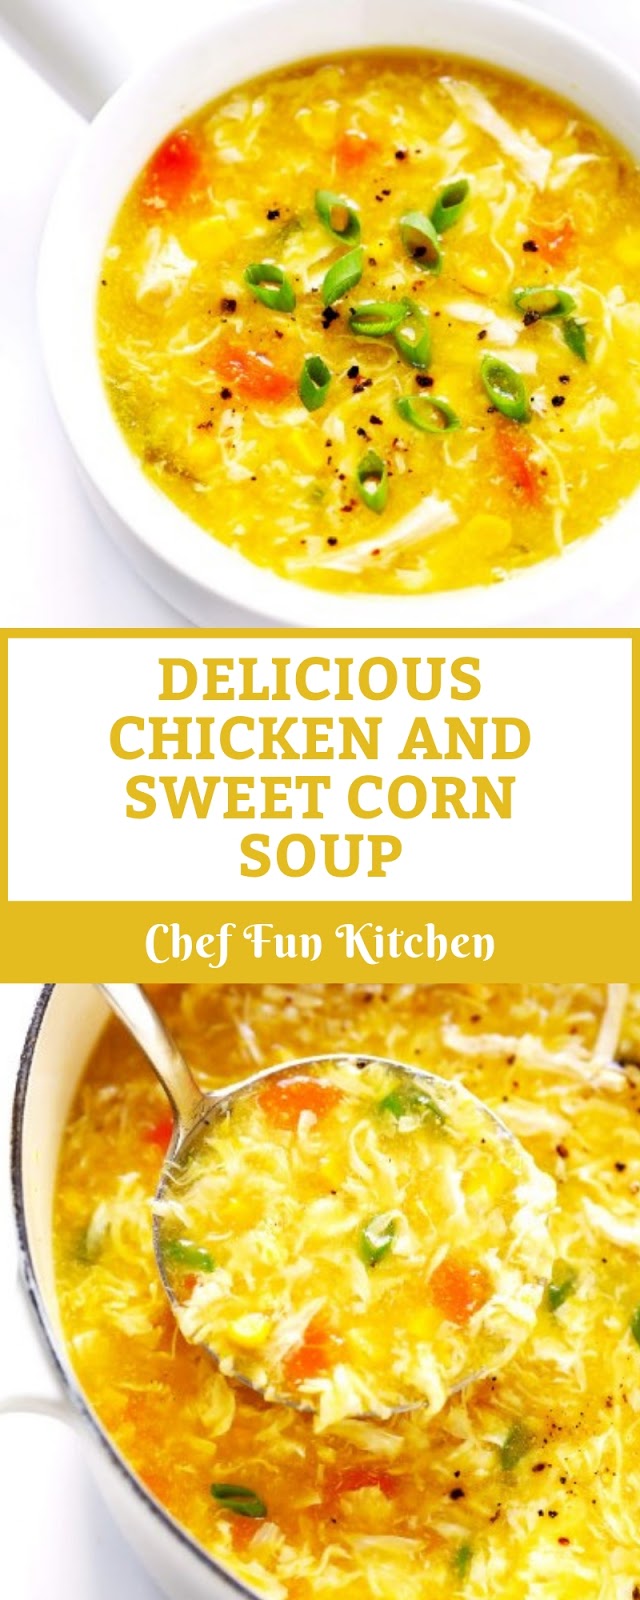 DELICIOUS CHICKEN AND SWEET CORN SOUP